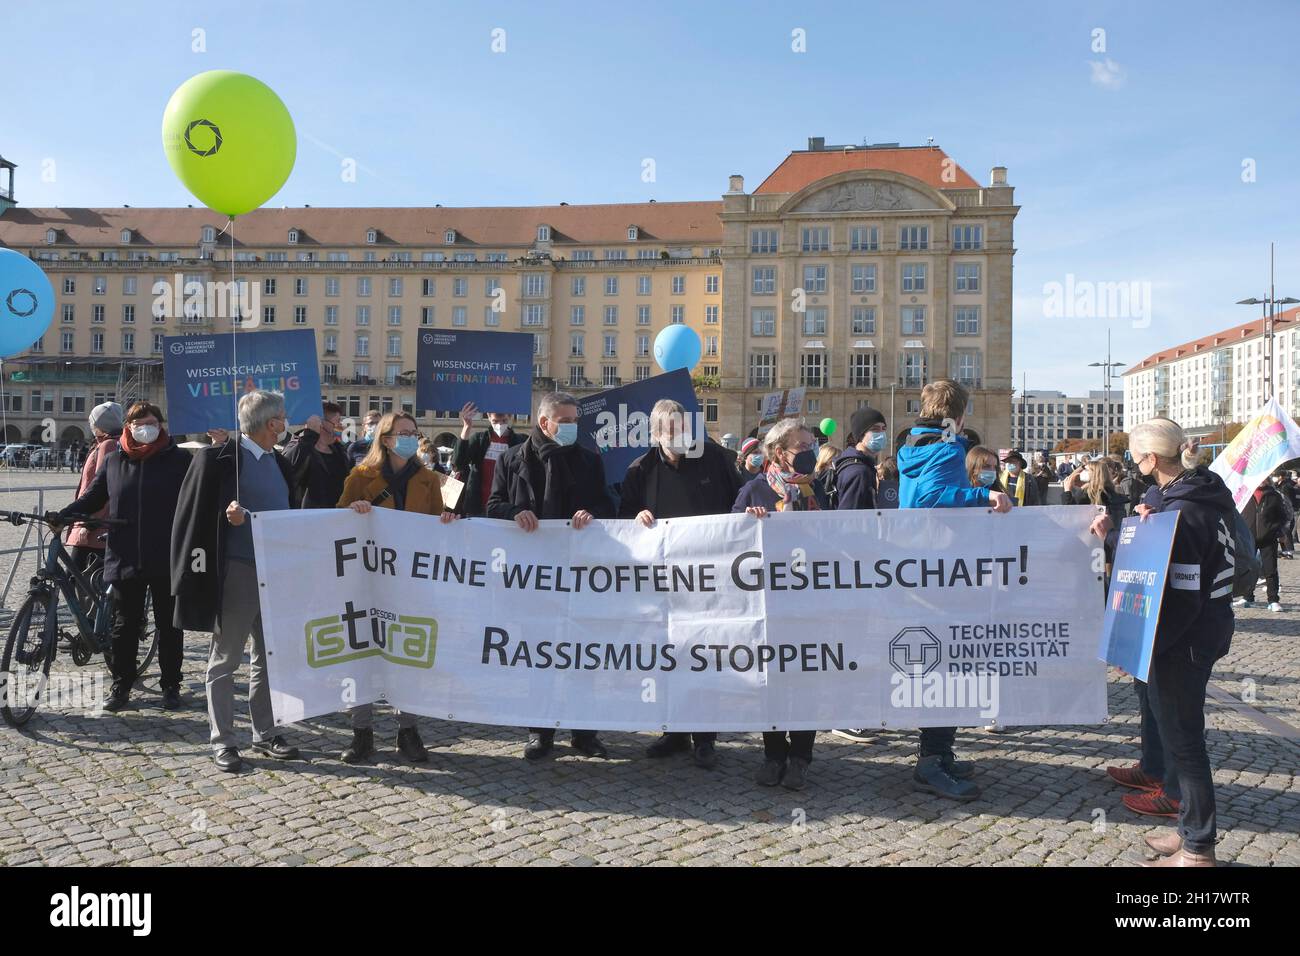 Dresden, Germany. 17th Oct, 2021. Demonstrators carry a banner reading 'For an open-minded society! Stop racism!' at the counter-demonstration on the 7th anniversary of the Pegida movement. Credit: Matthias Rietschel/dpa-Zentralbild/dpa/Alamy Live News Stock Photo